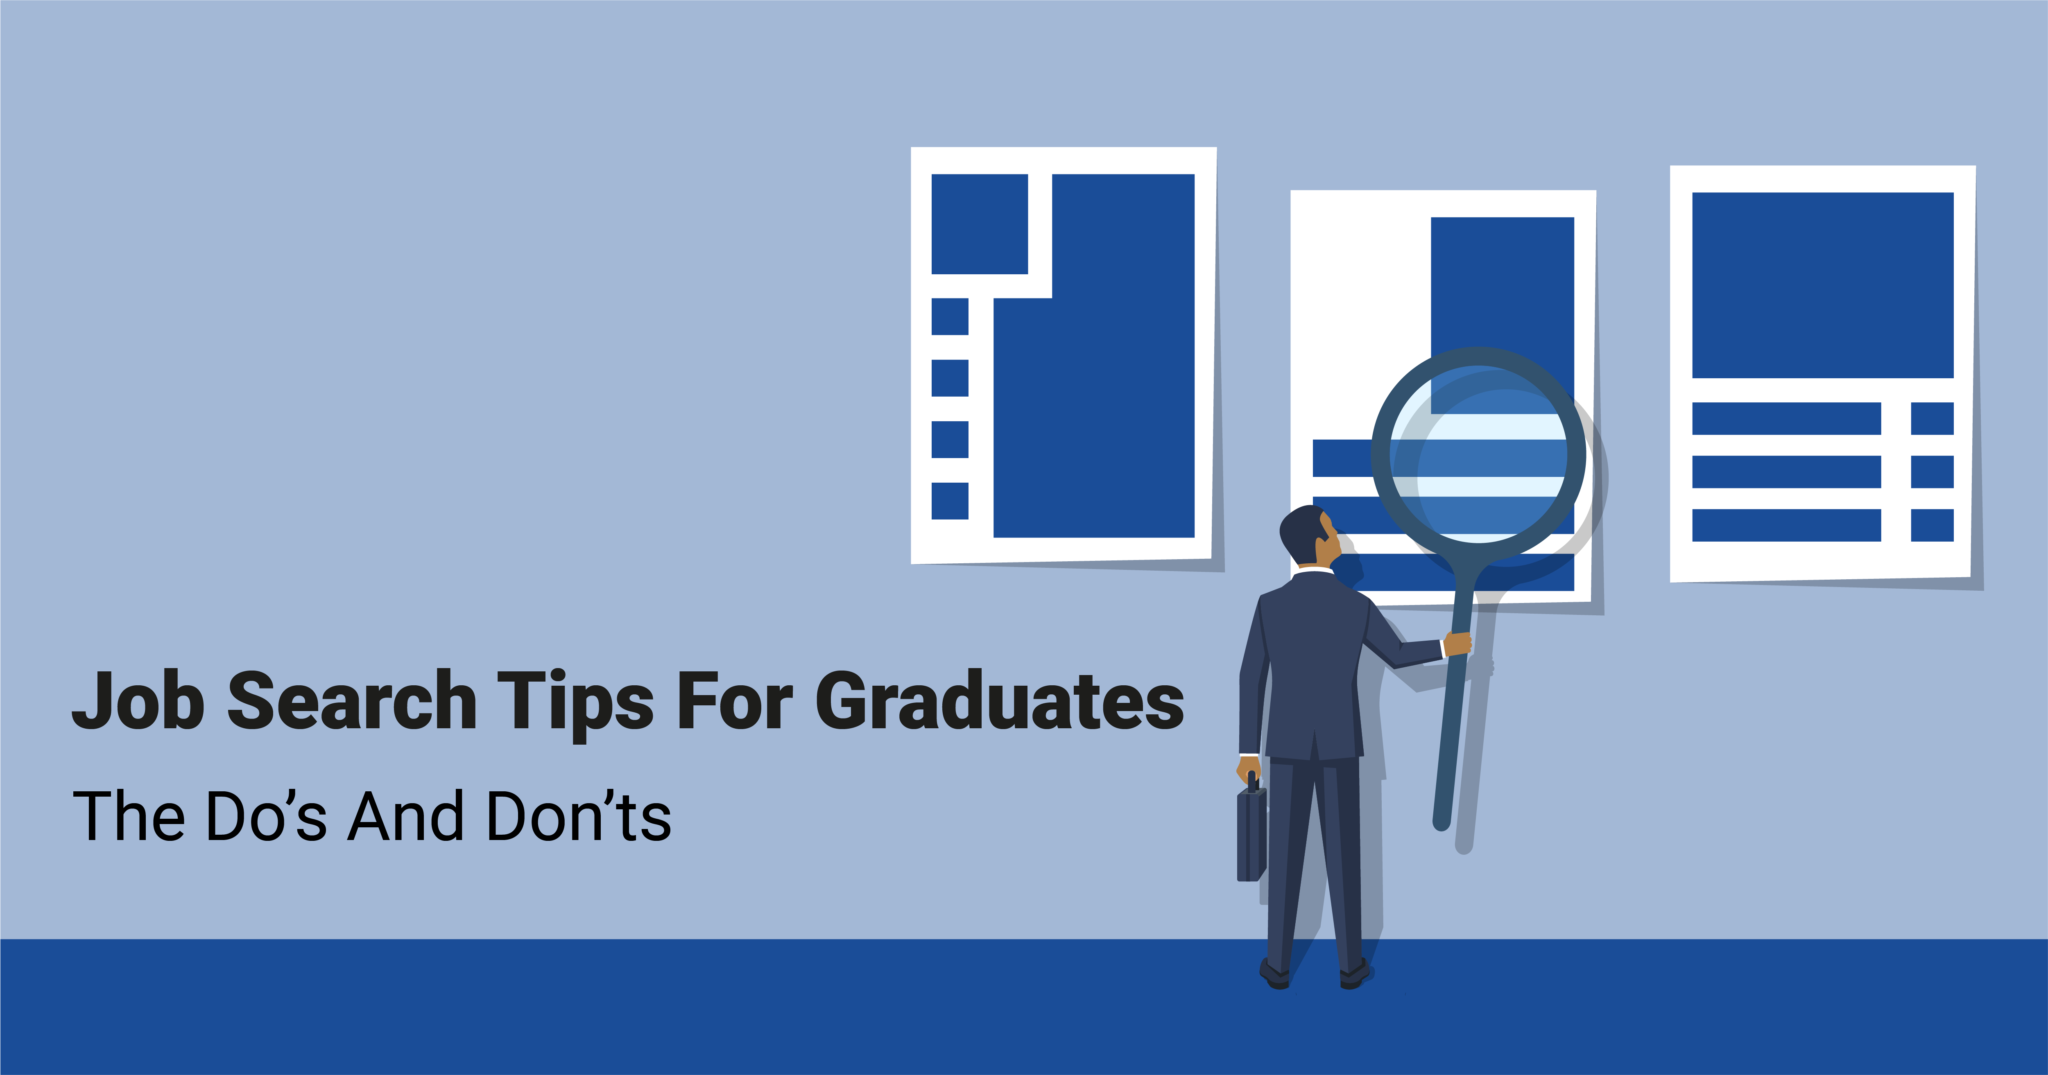 Job Search Tips for Graduates: The Do’s and Don’ts